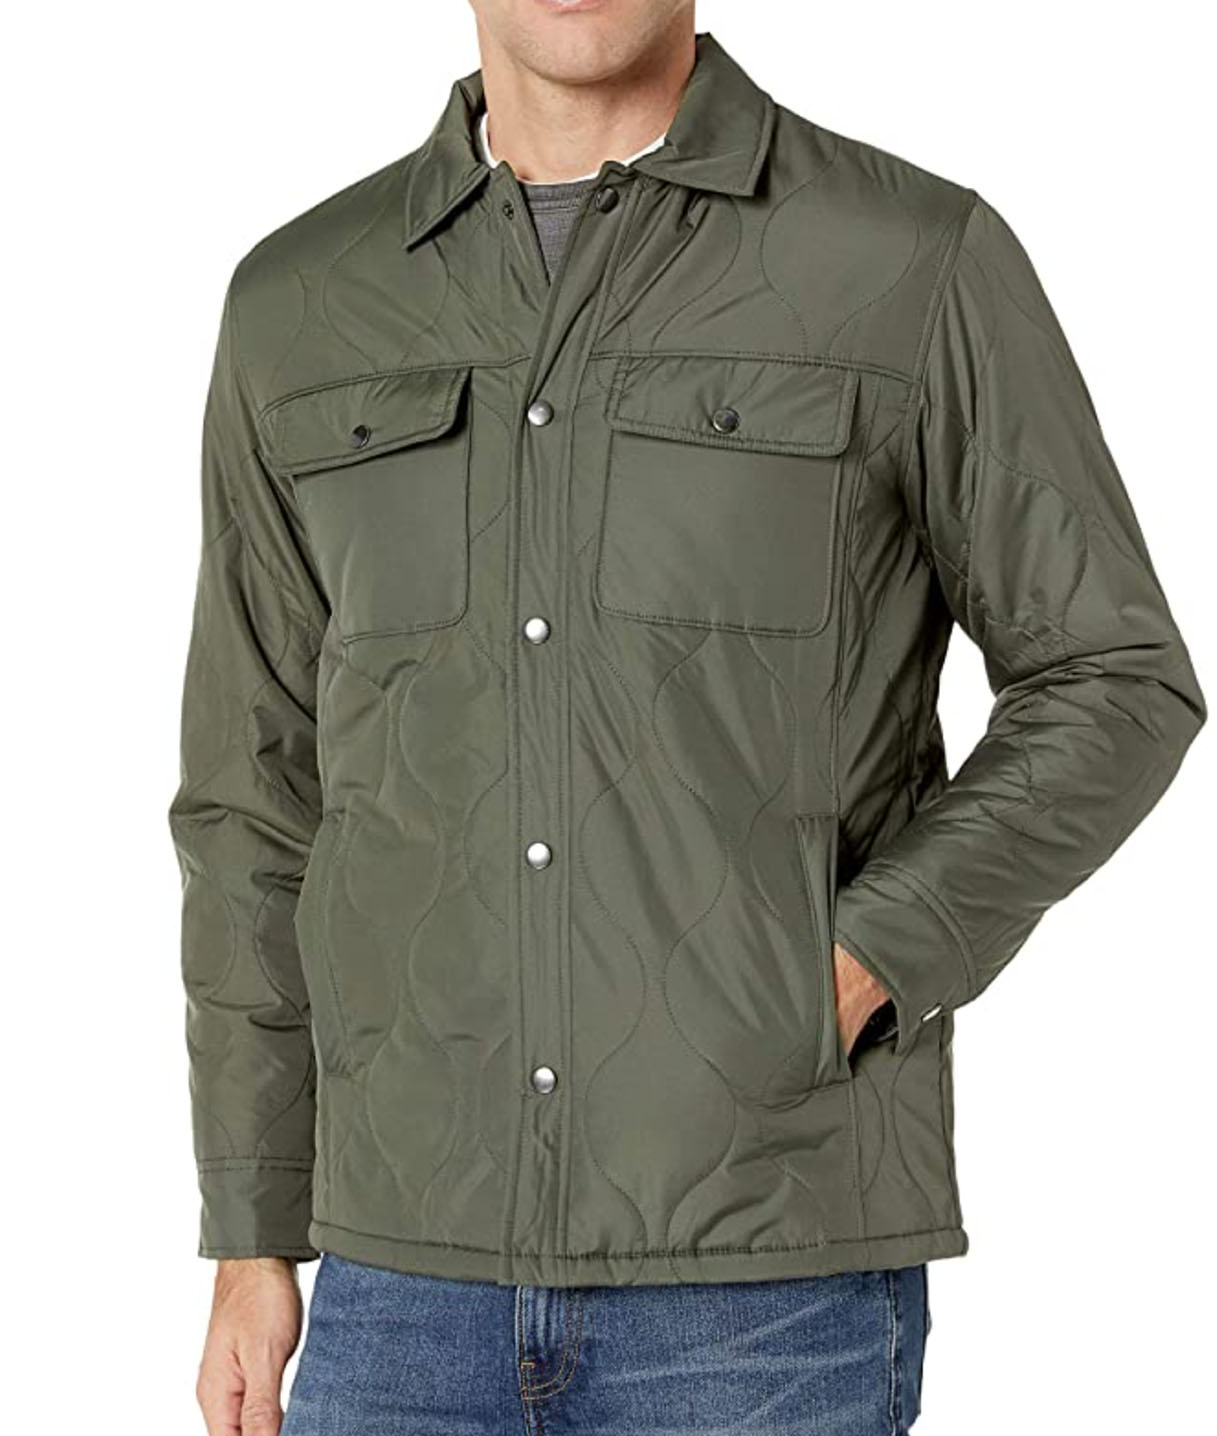 quilted shirt jacket  amazon prime day